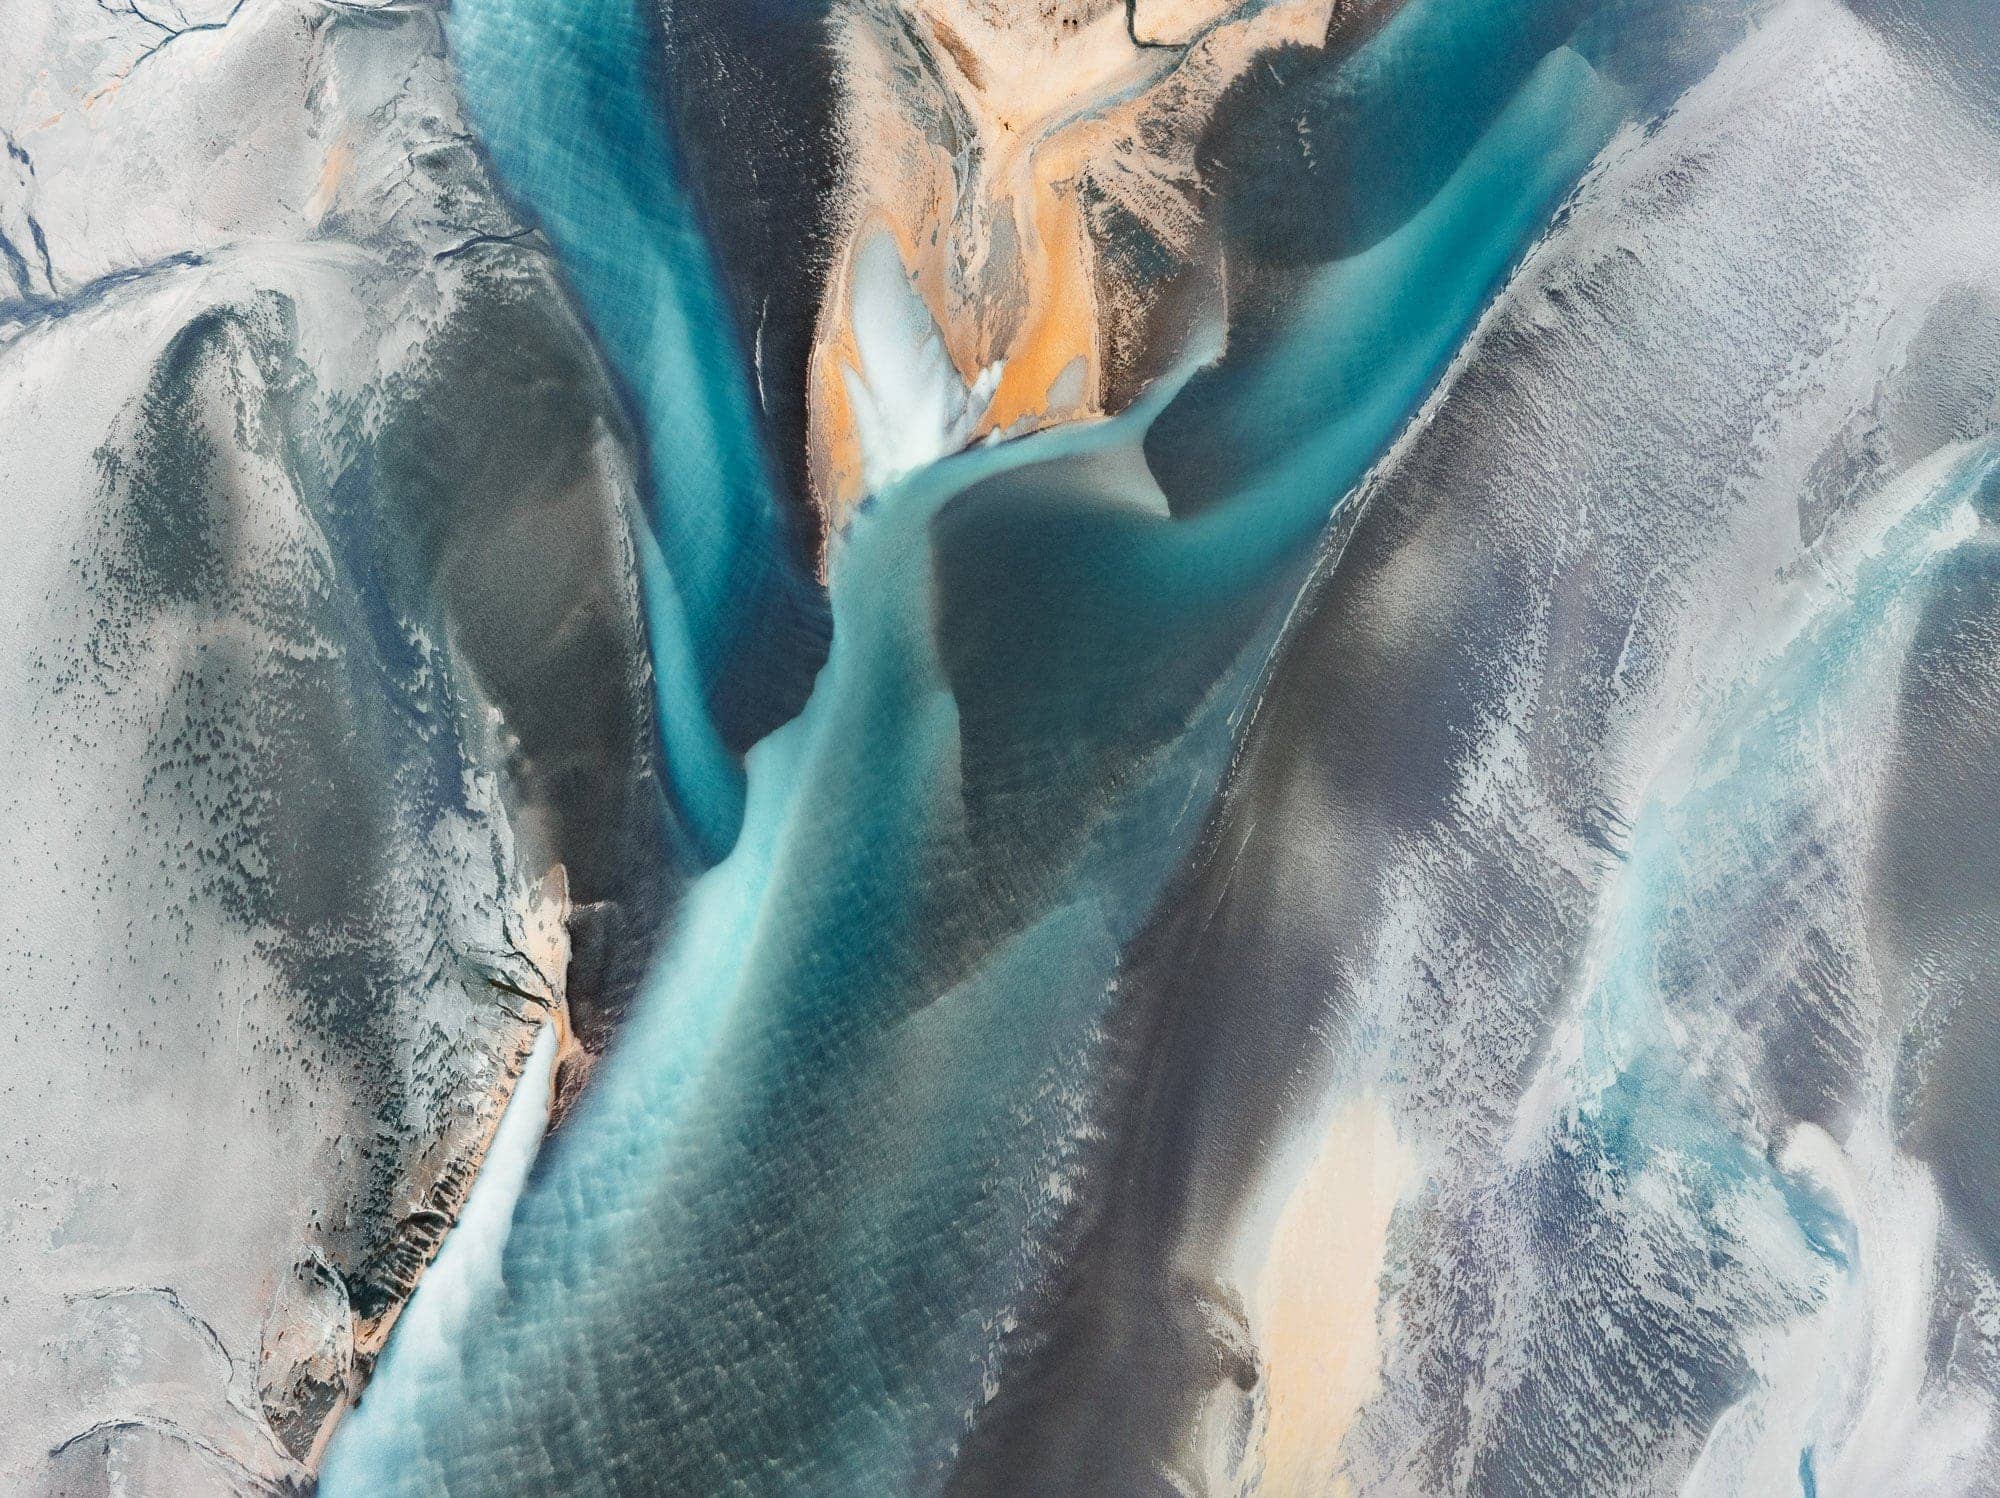 Aerial shot of the dynamic interface between water and volcanic sands near Höfn, Iceland, displaying a stunning abstract pattern.